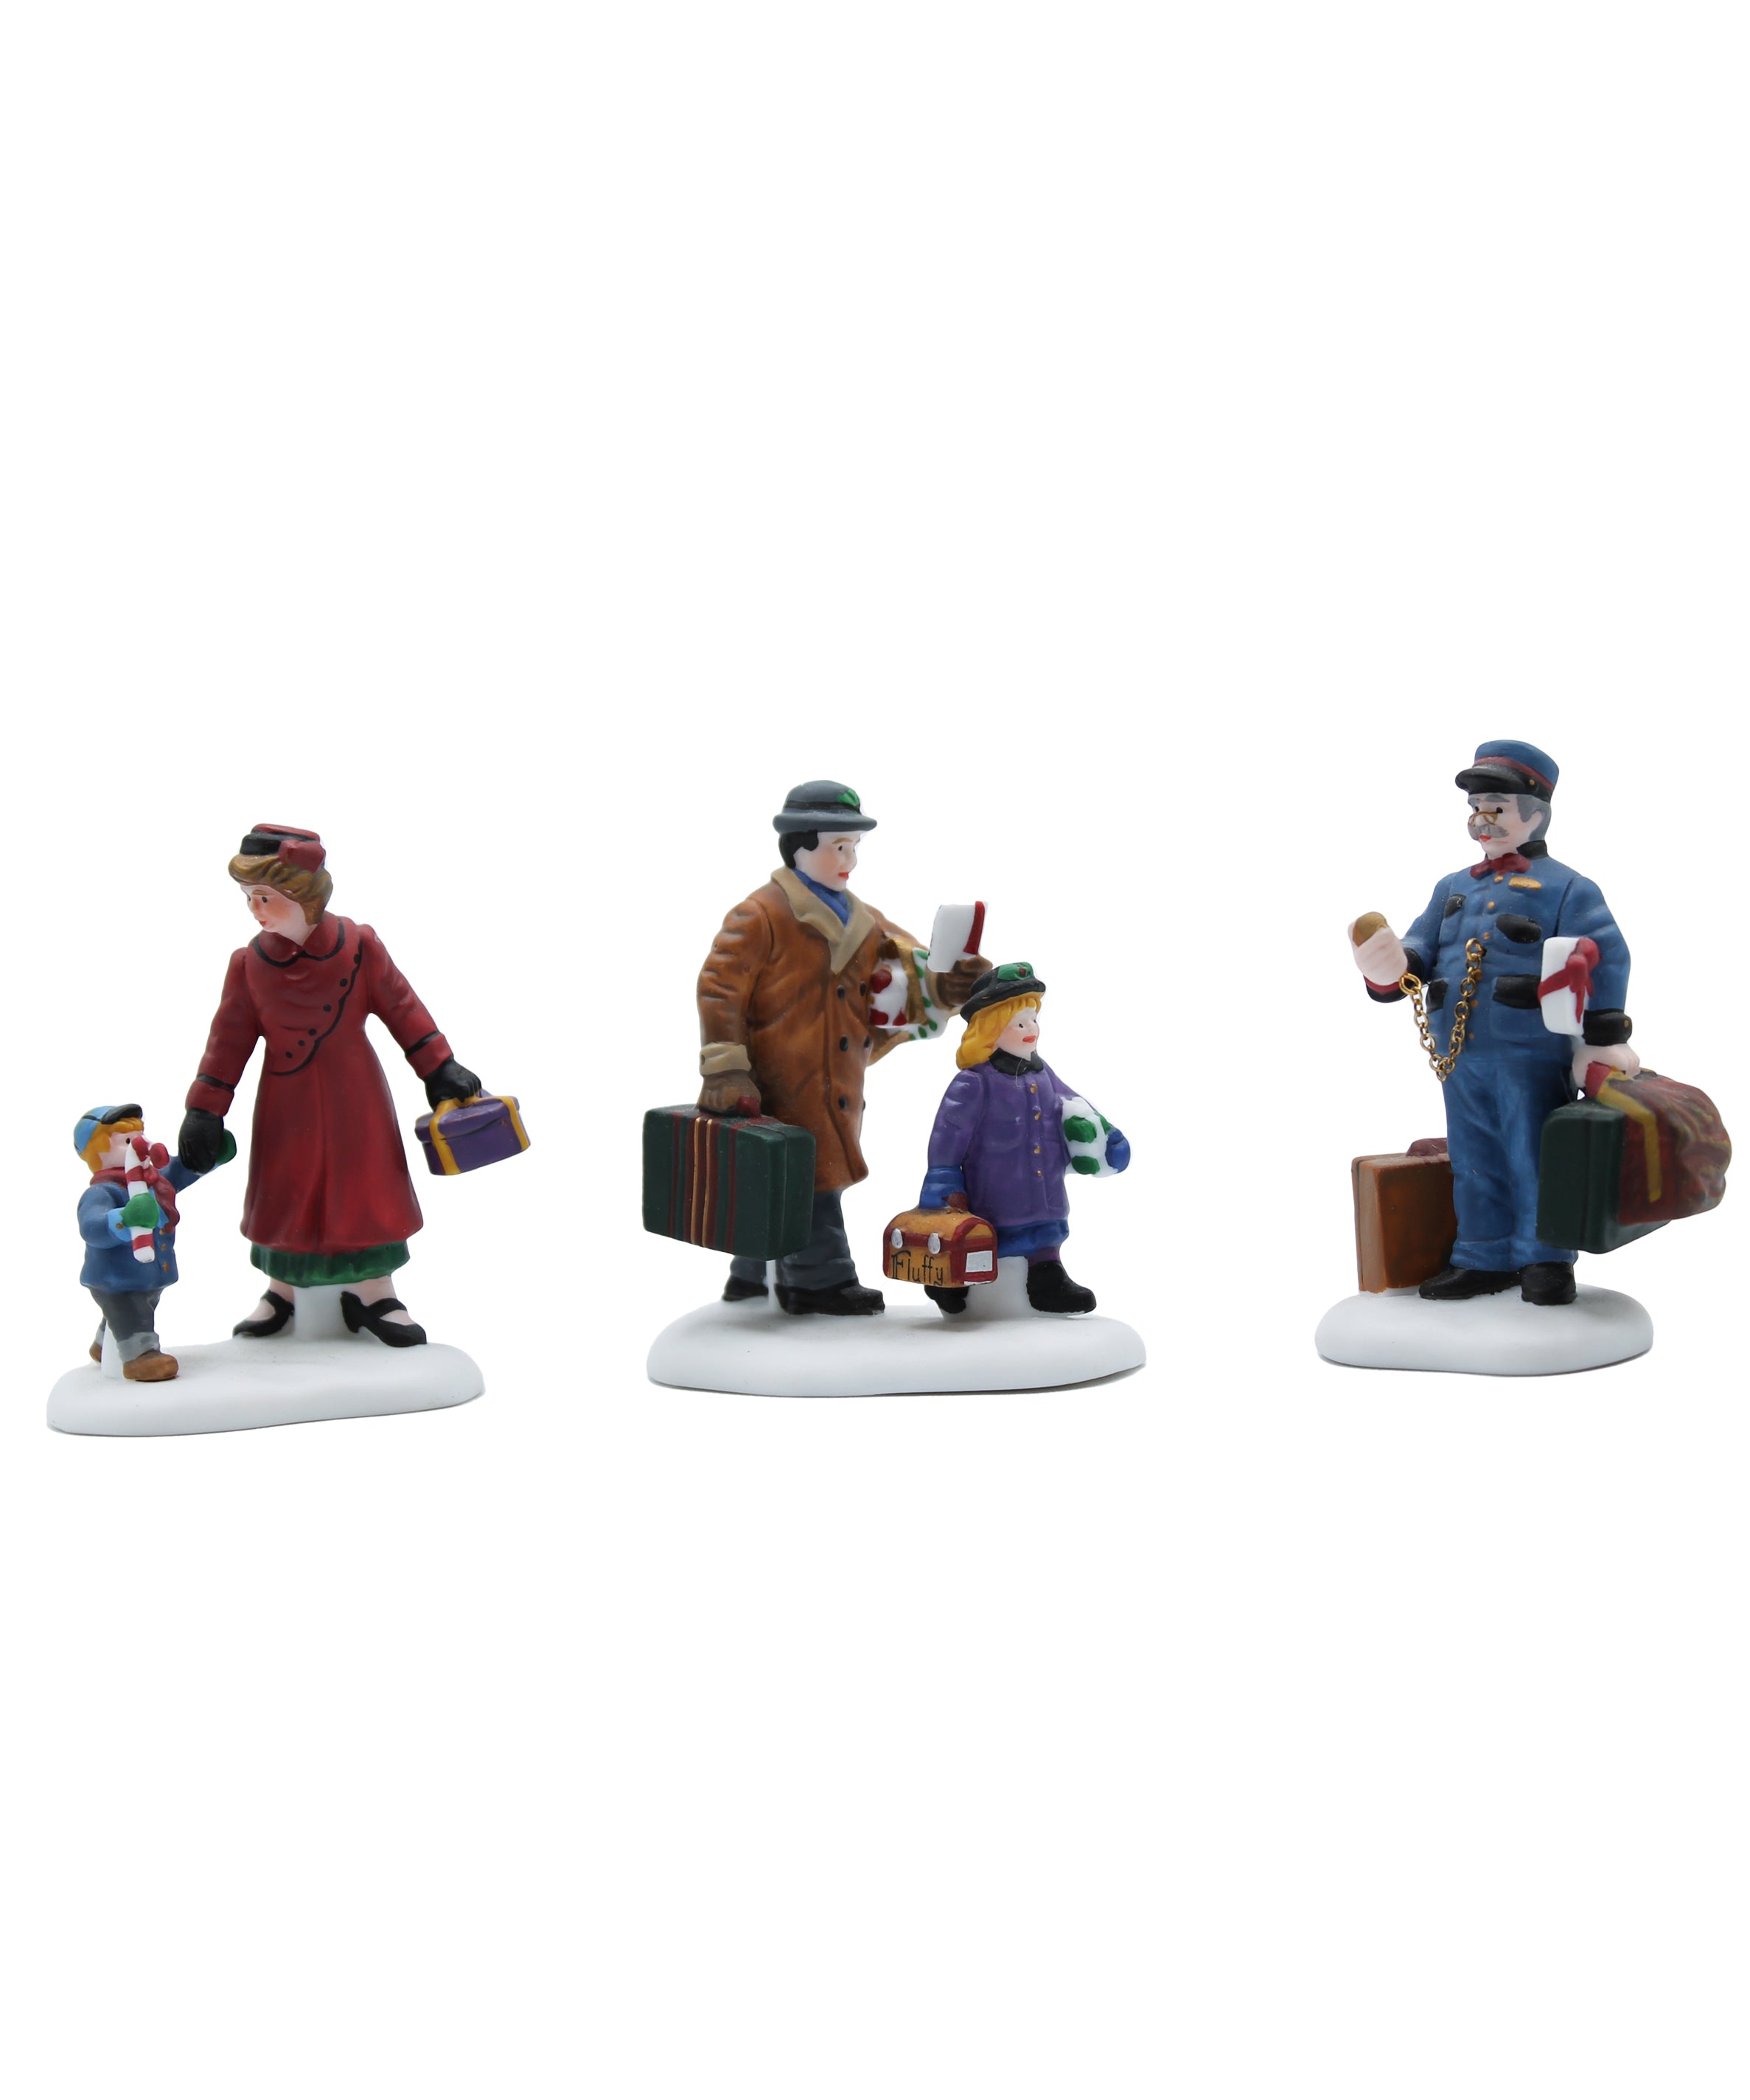 Department 56 Christmas in the City Figurines